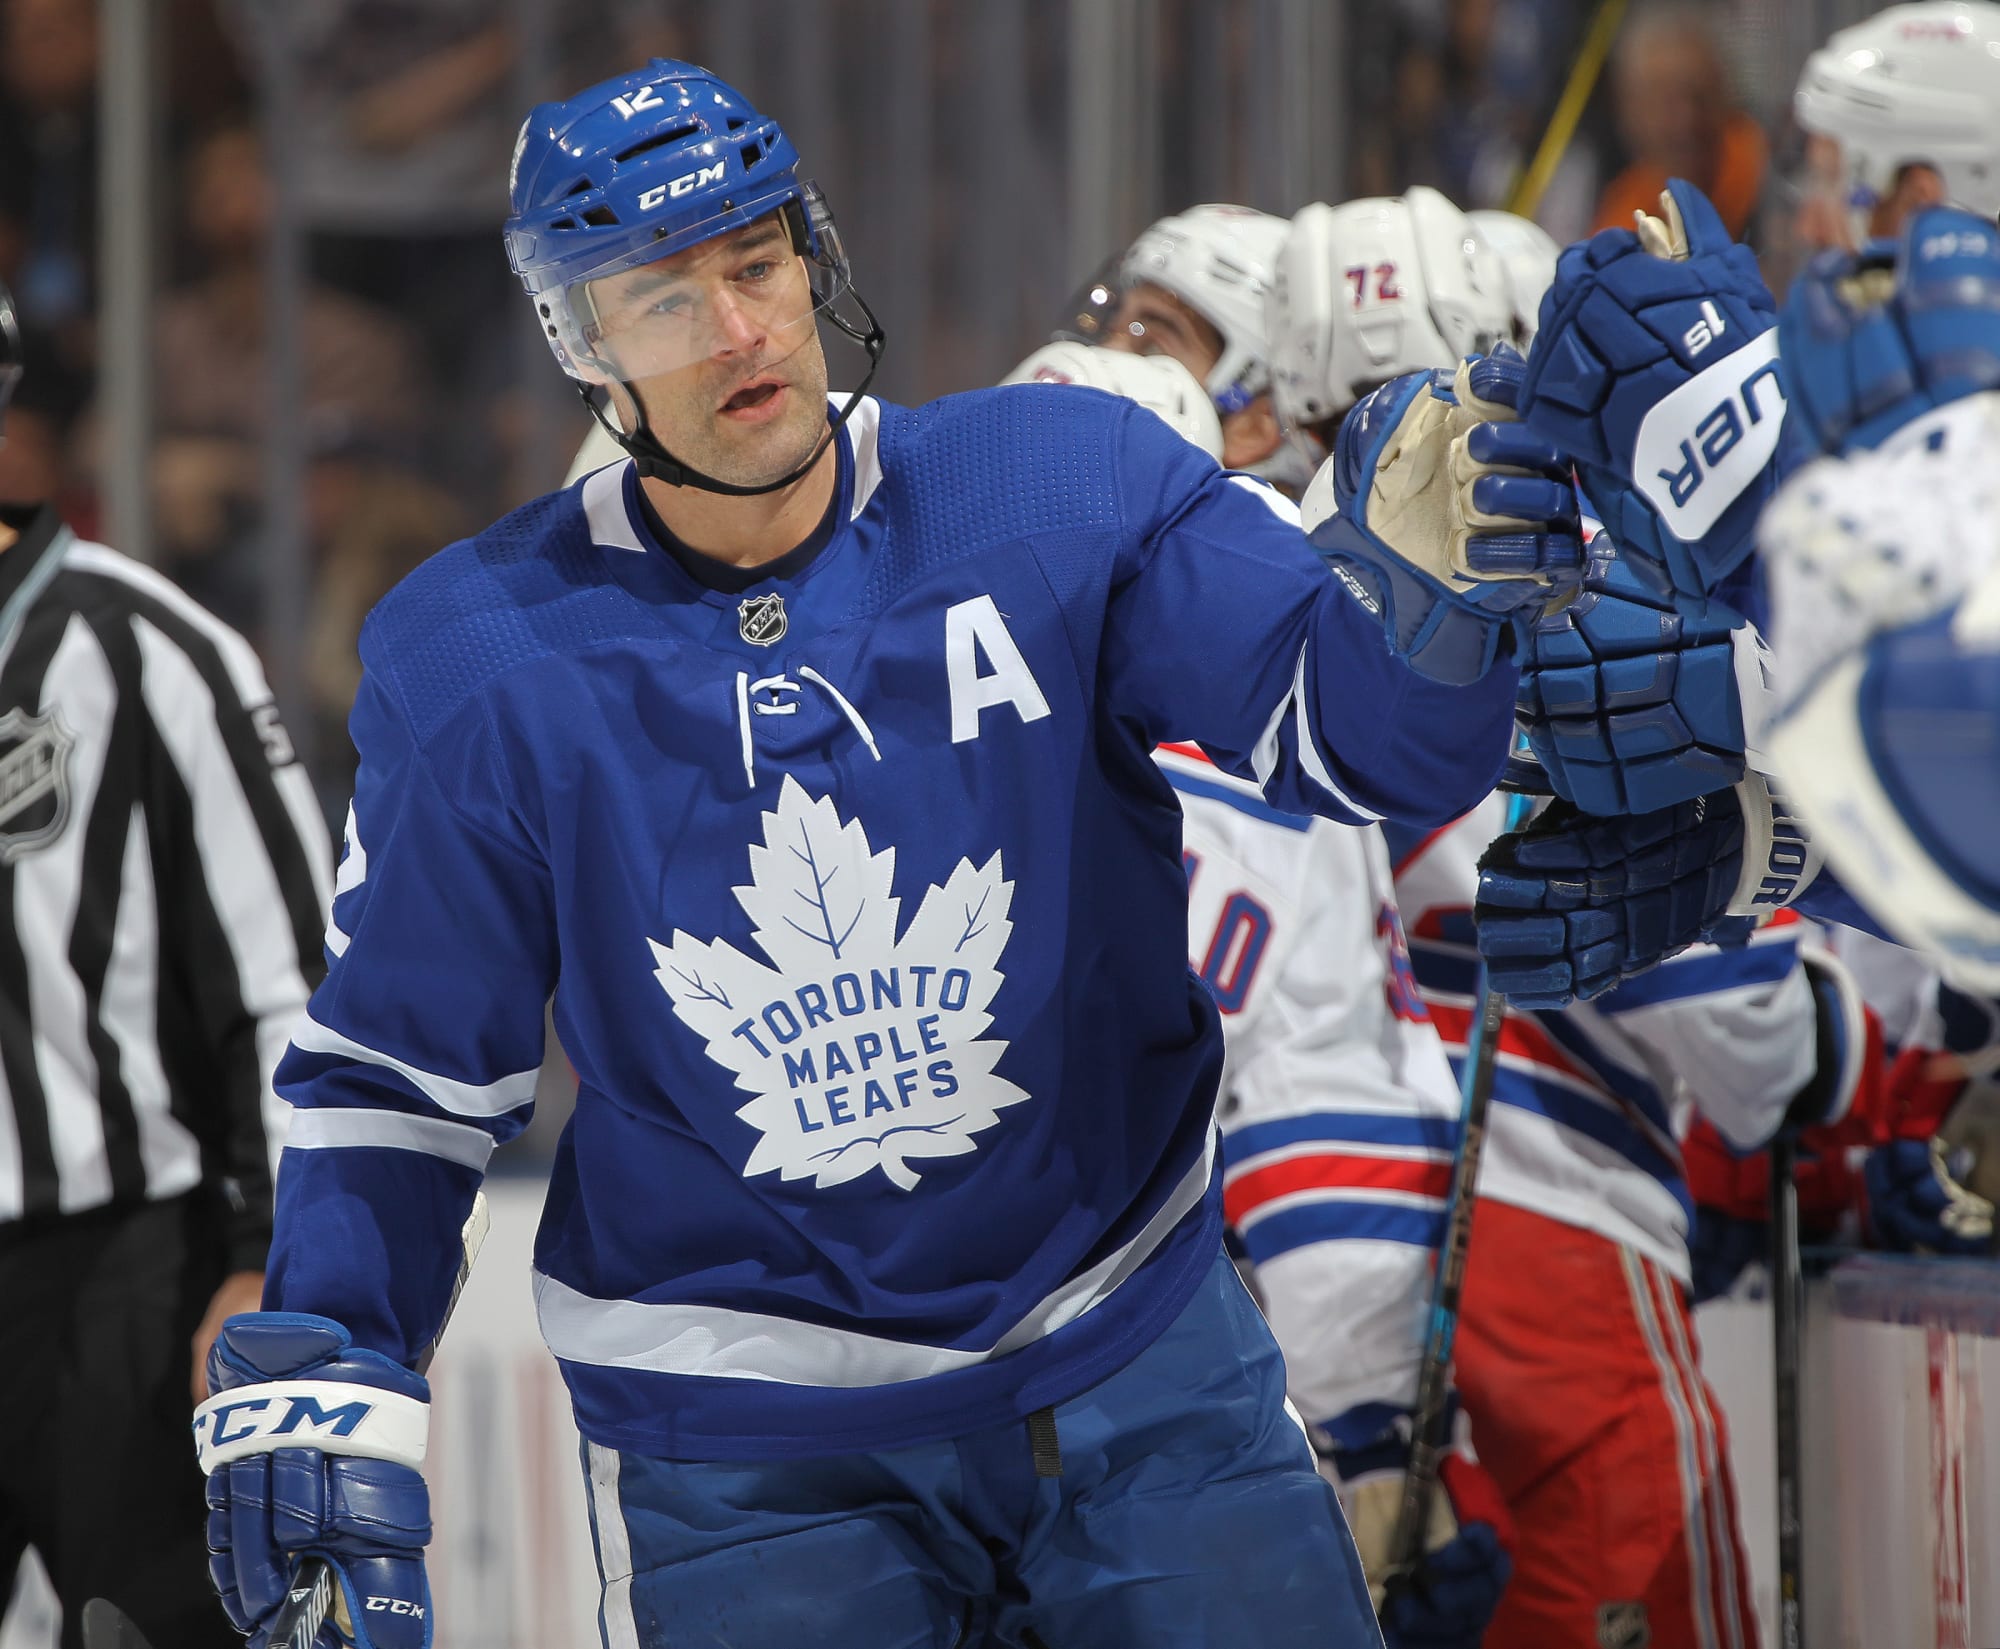 From Aneroid to Toronto: Who is Patrick Marleau? - The Athletic